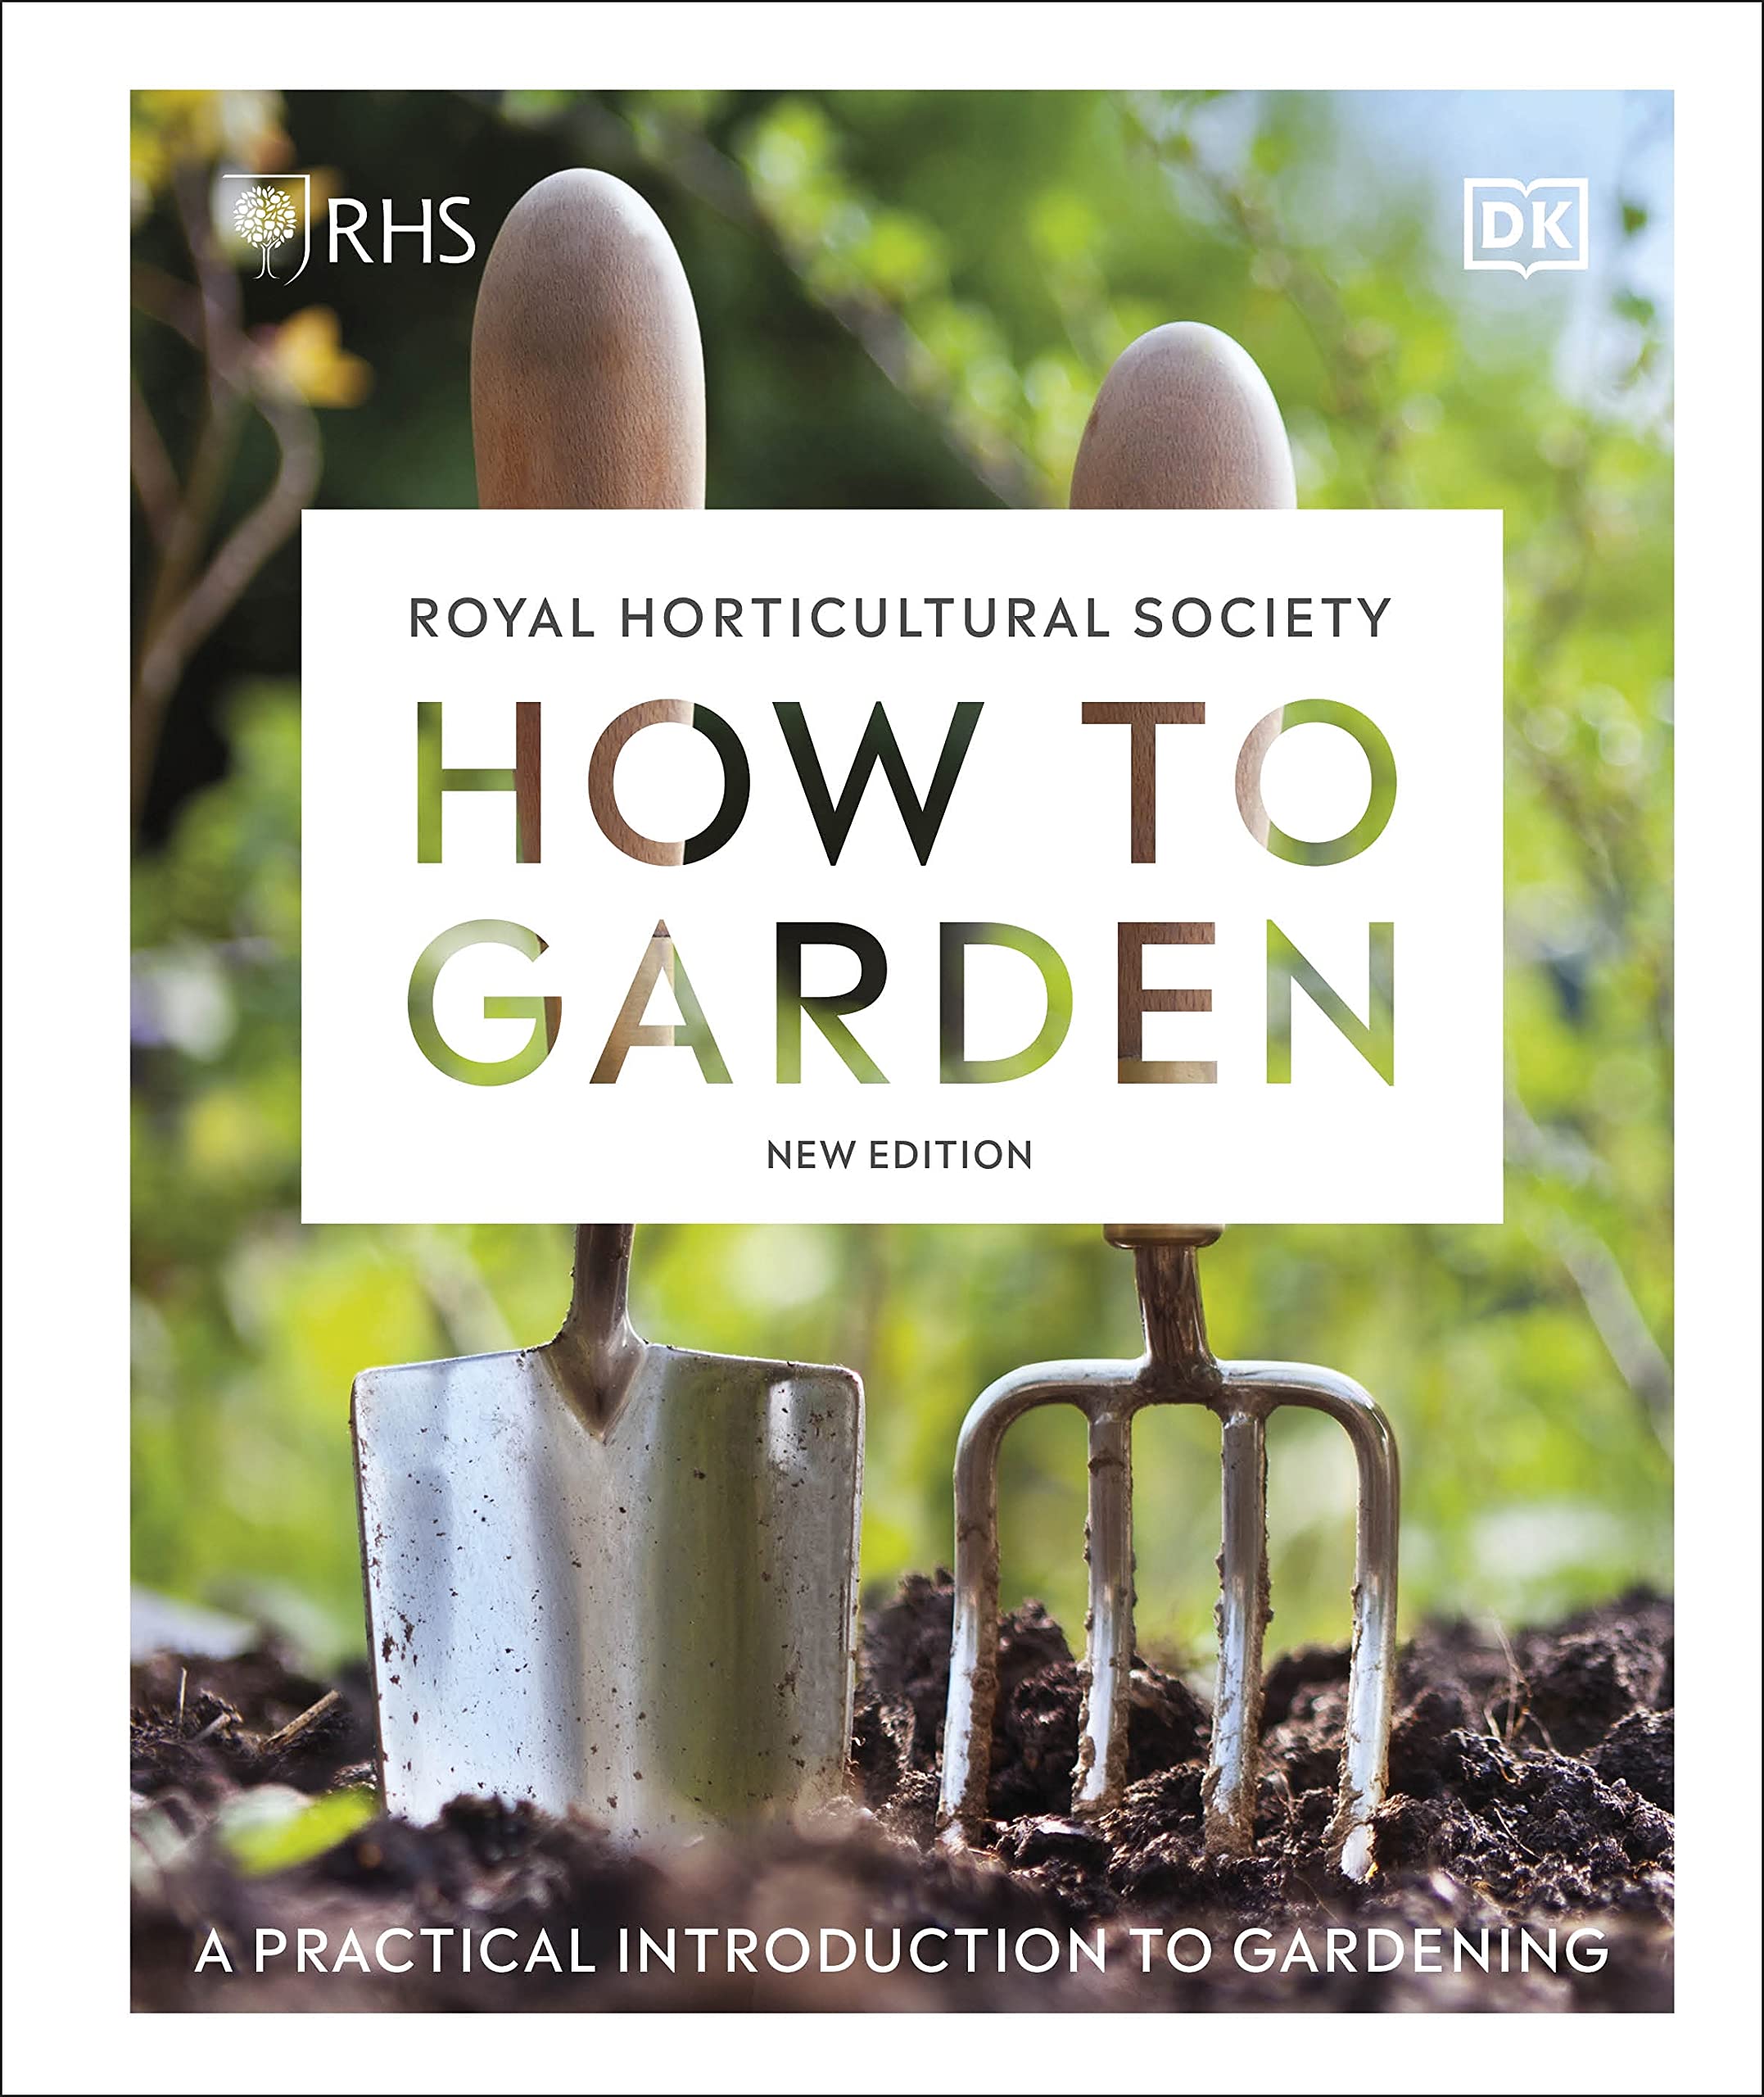 RHS How to Garden New Edition | DK